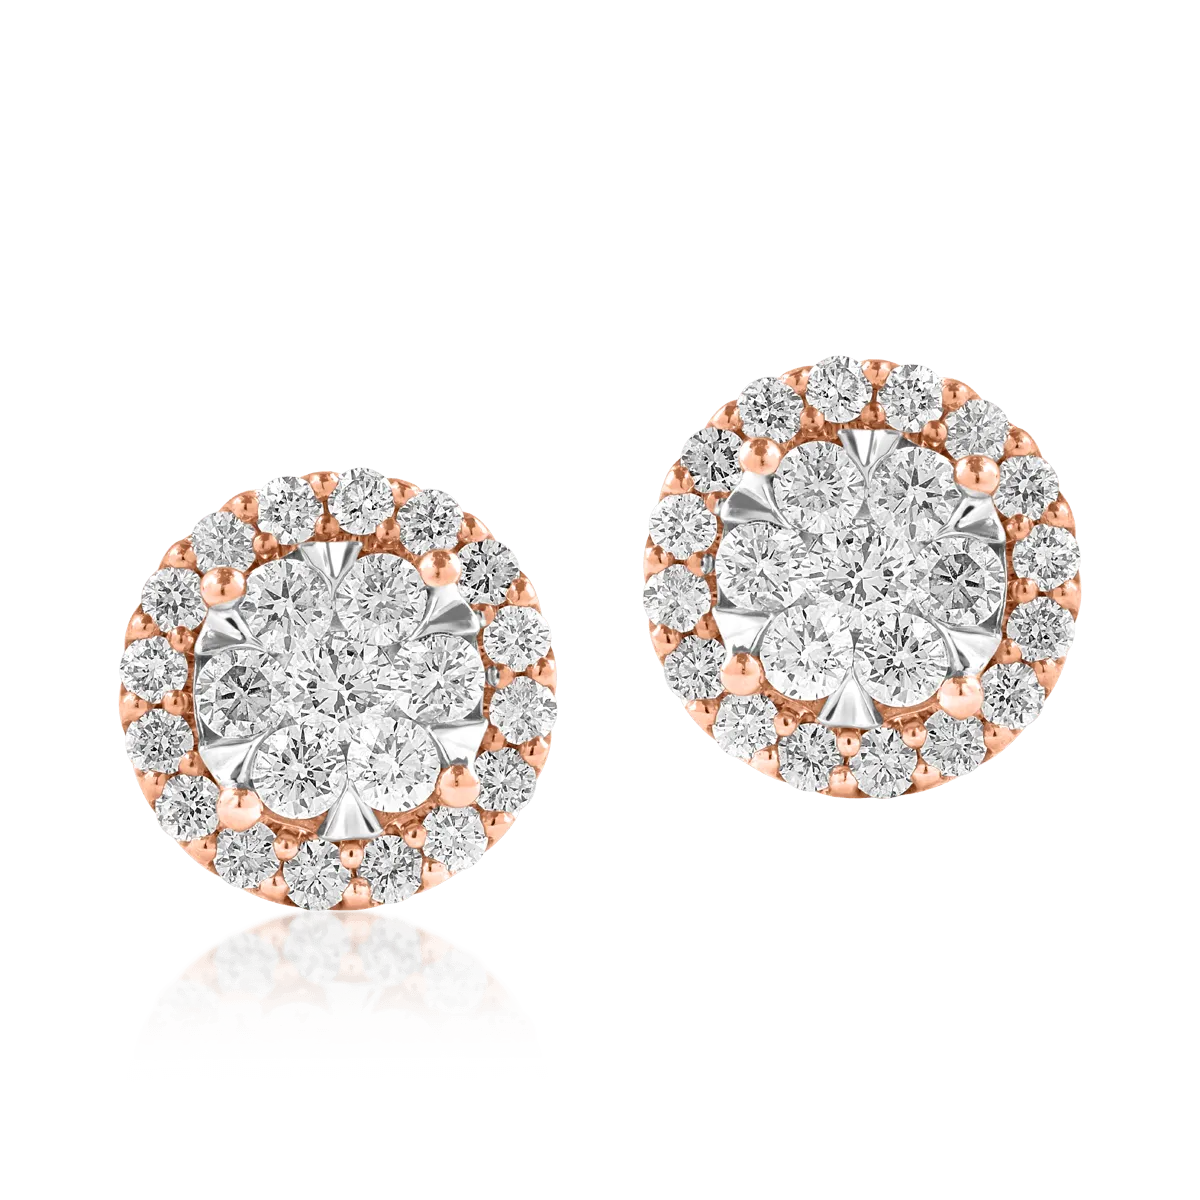 18K rose gold earrings with 1ct diamonds